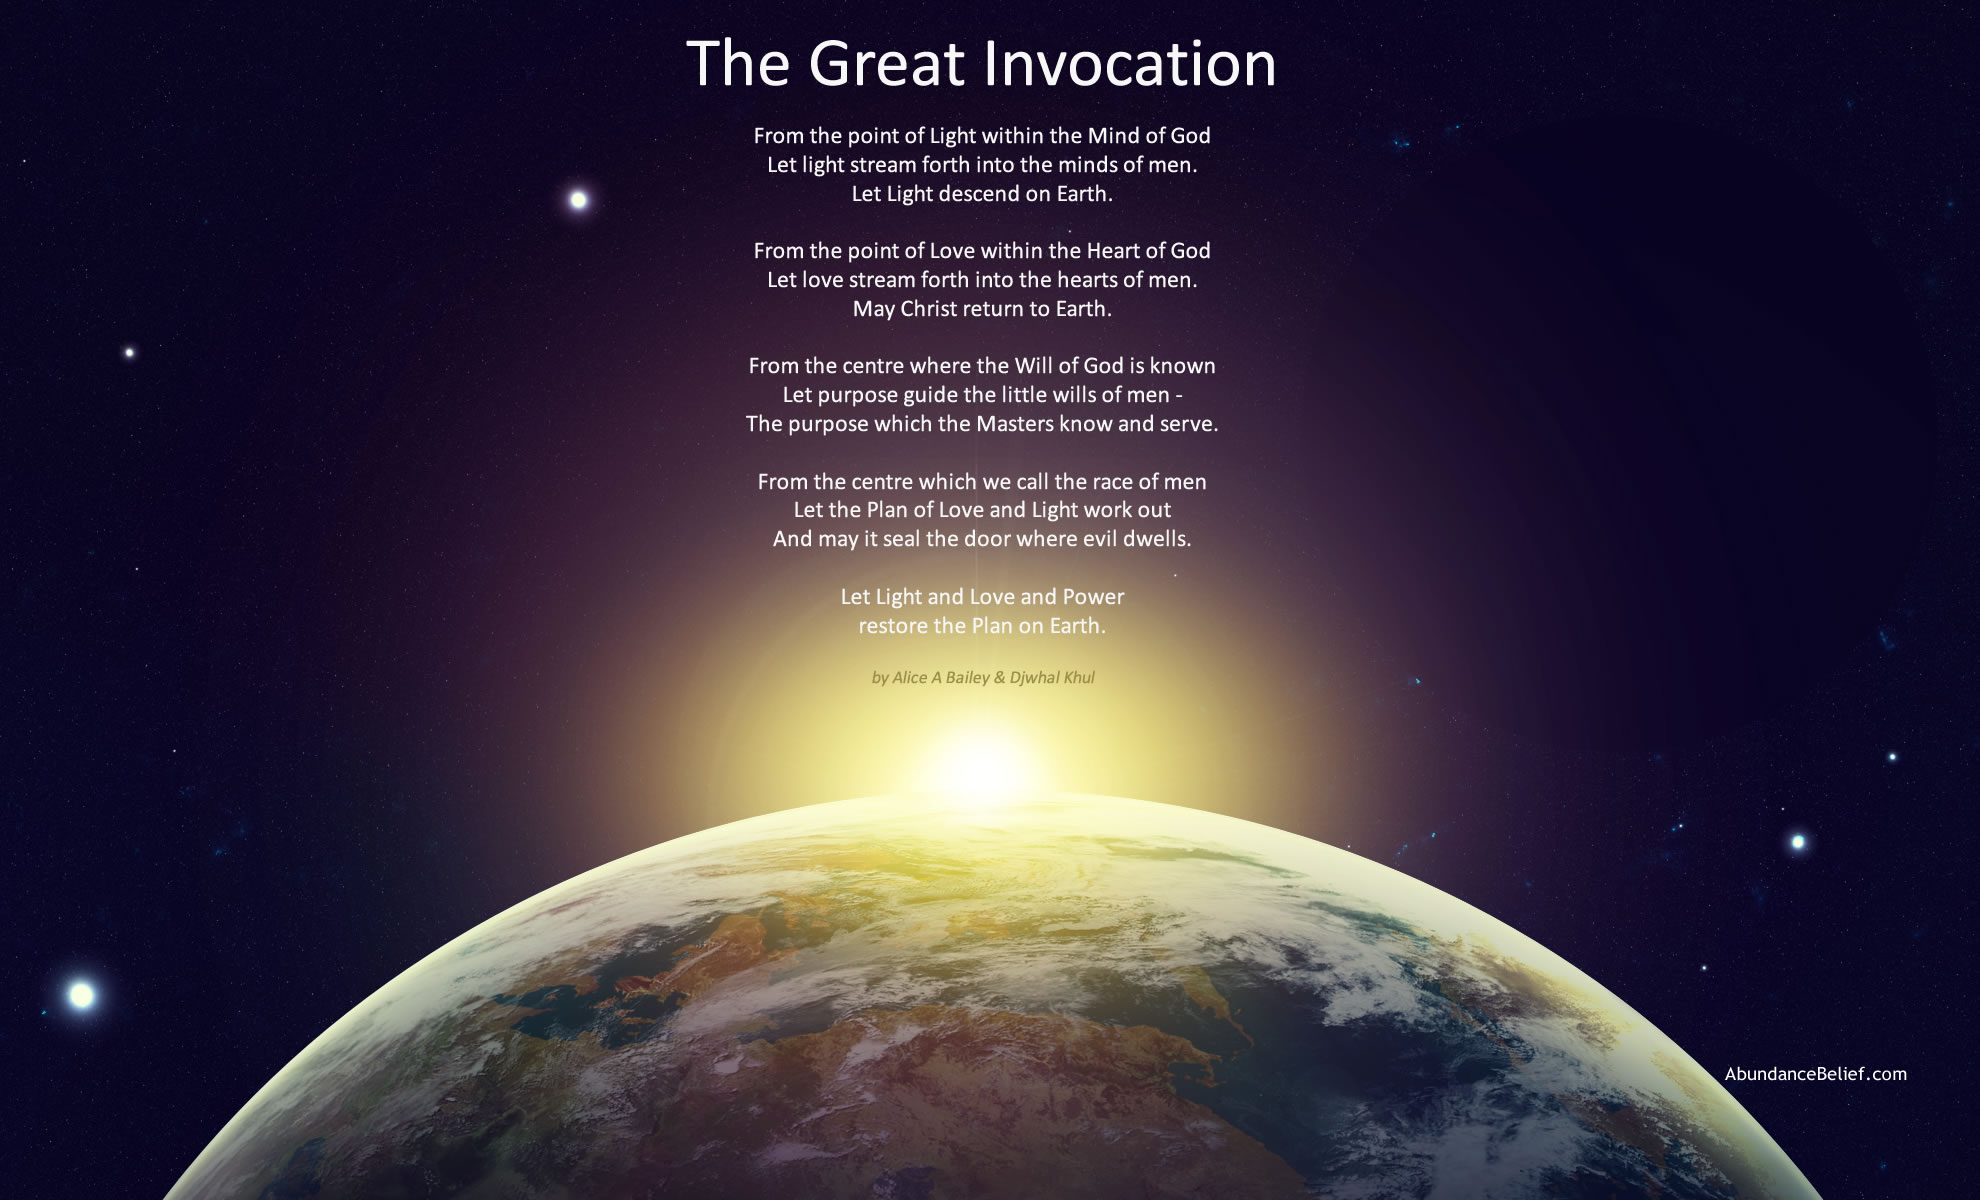 The Sun Coming over Earth's Horizon with The Great Invocation